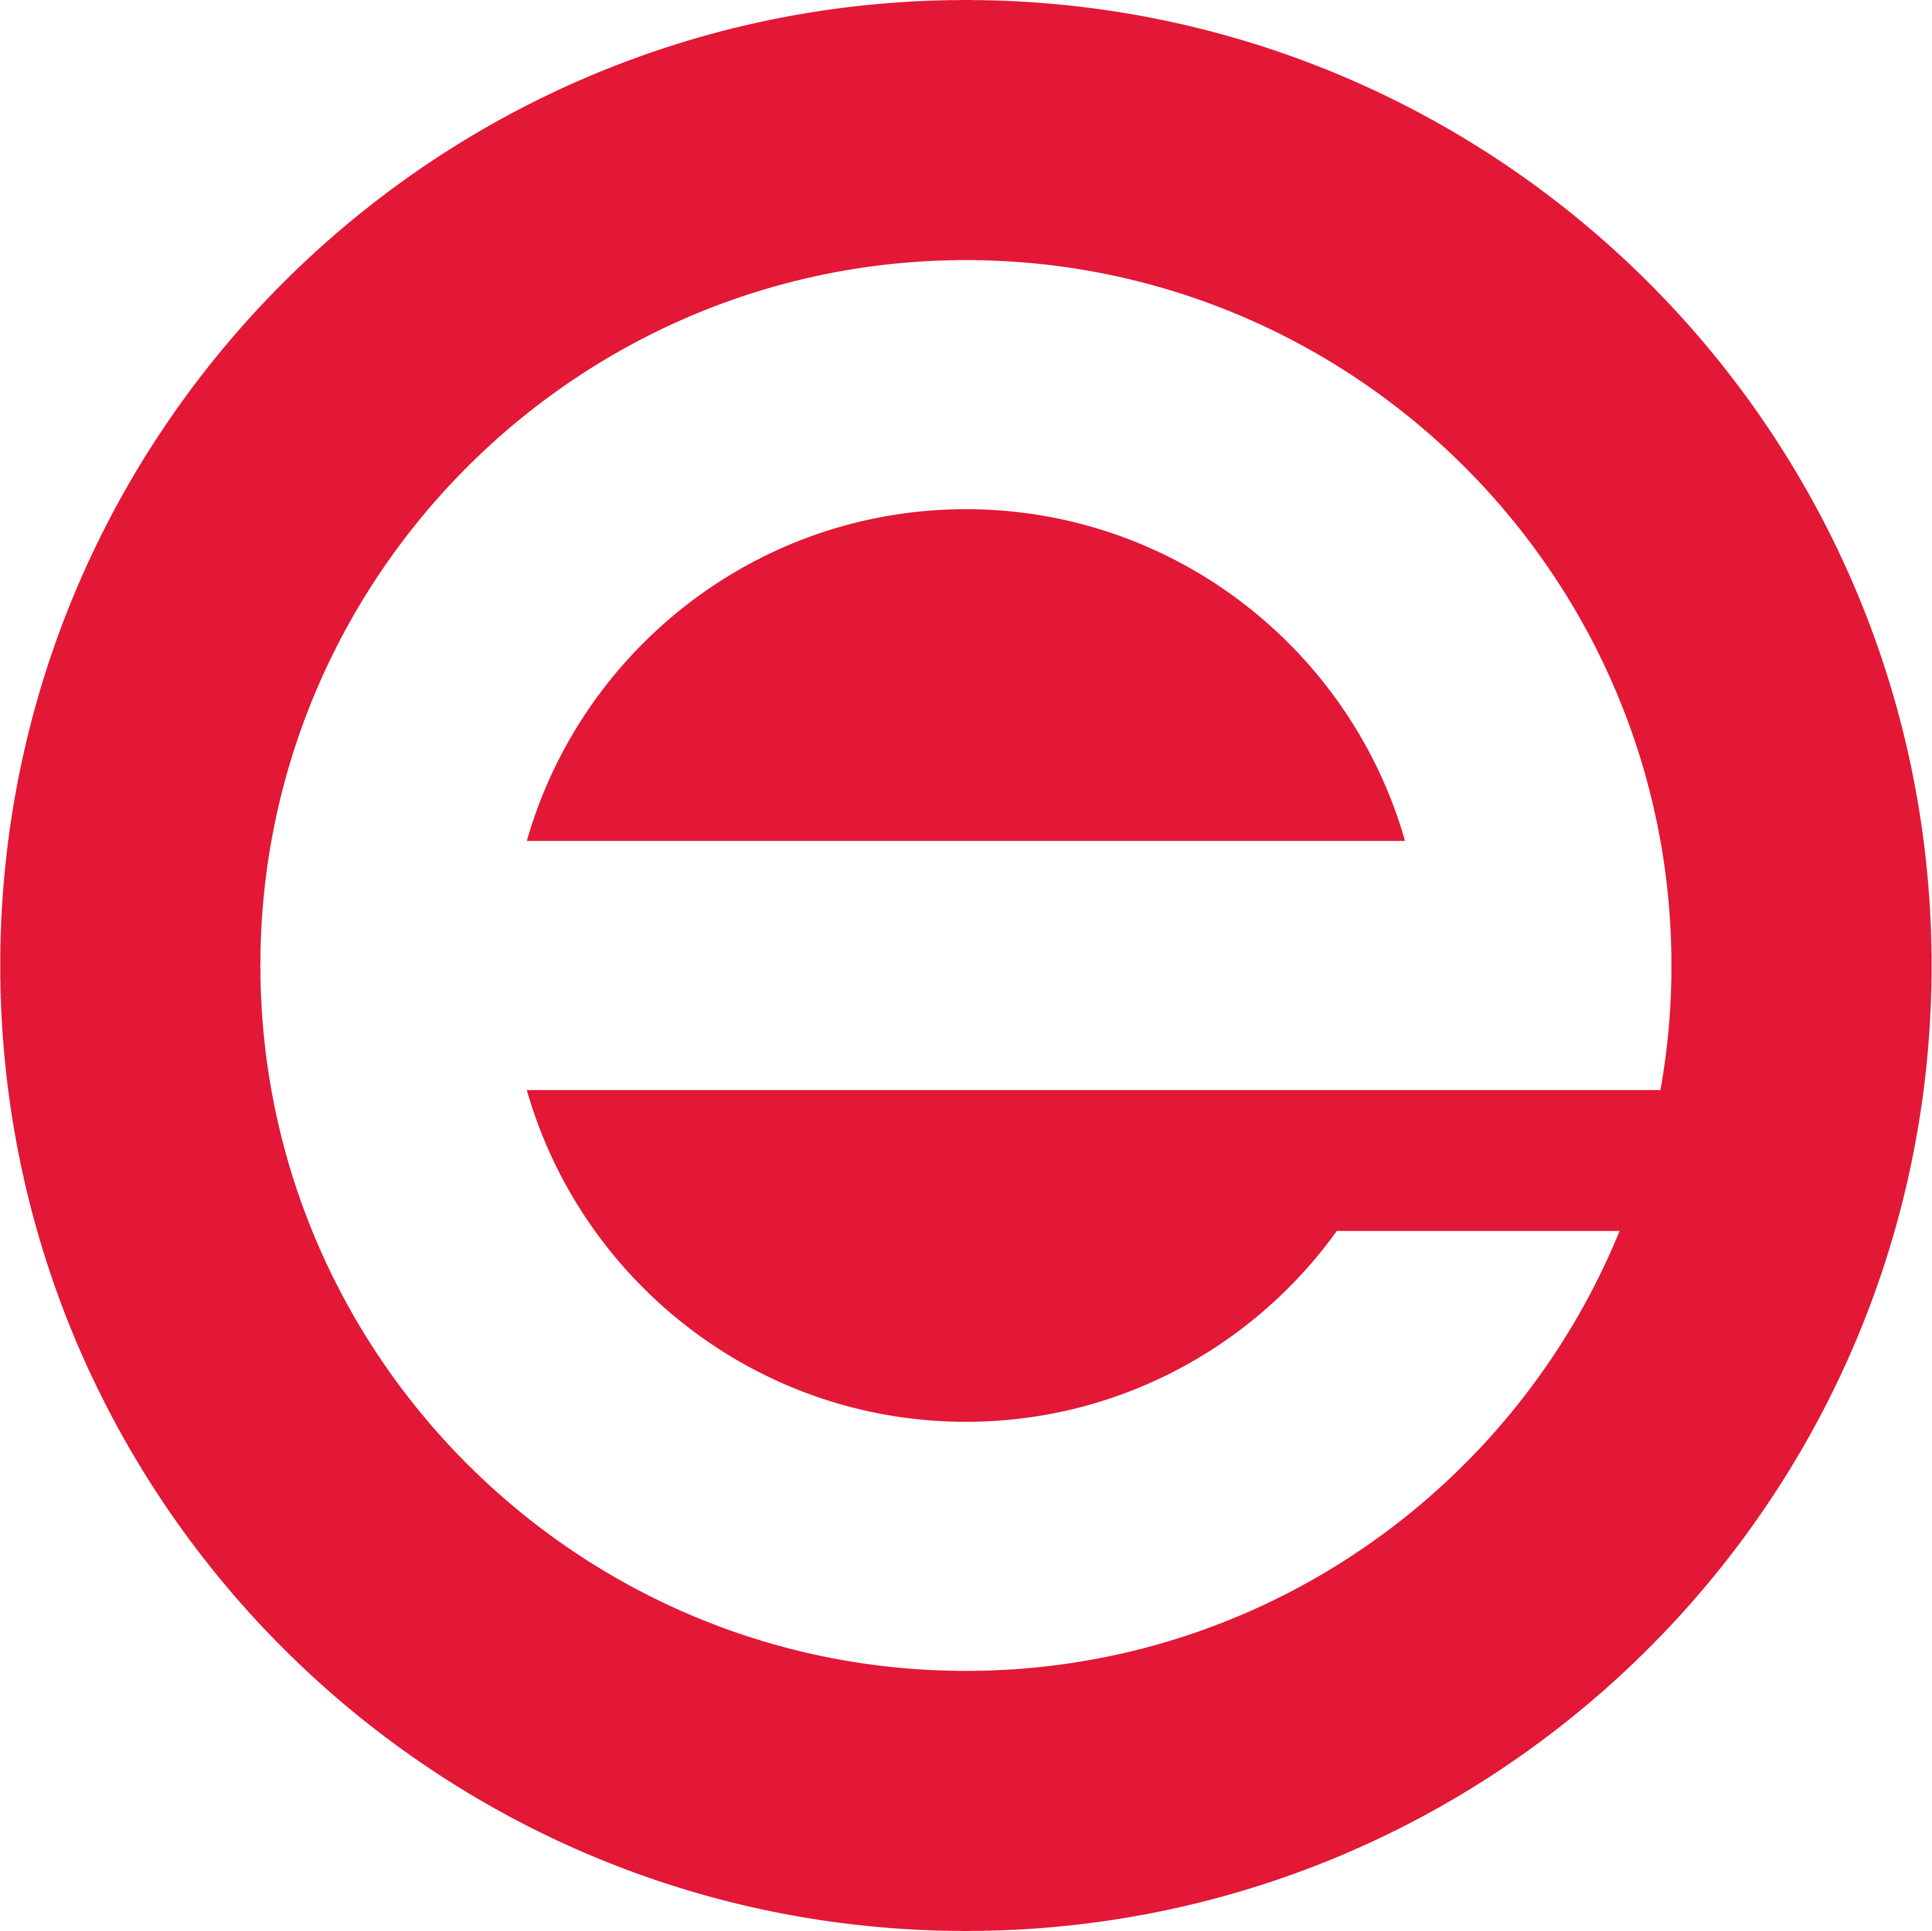 A white lower case "e" on a red background